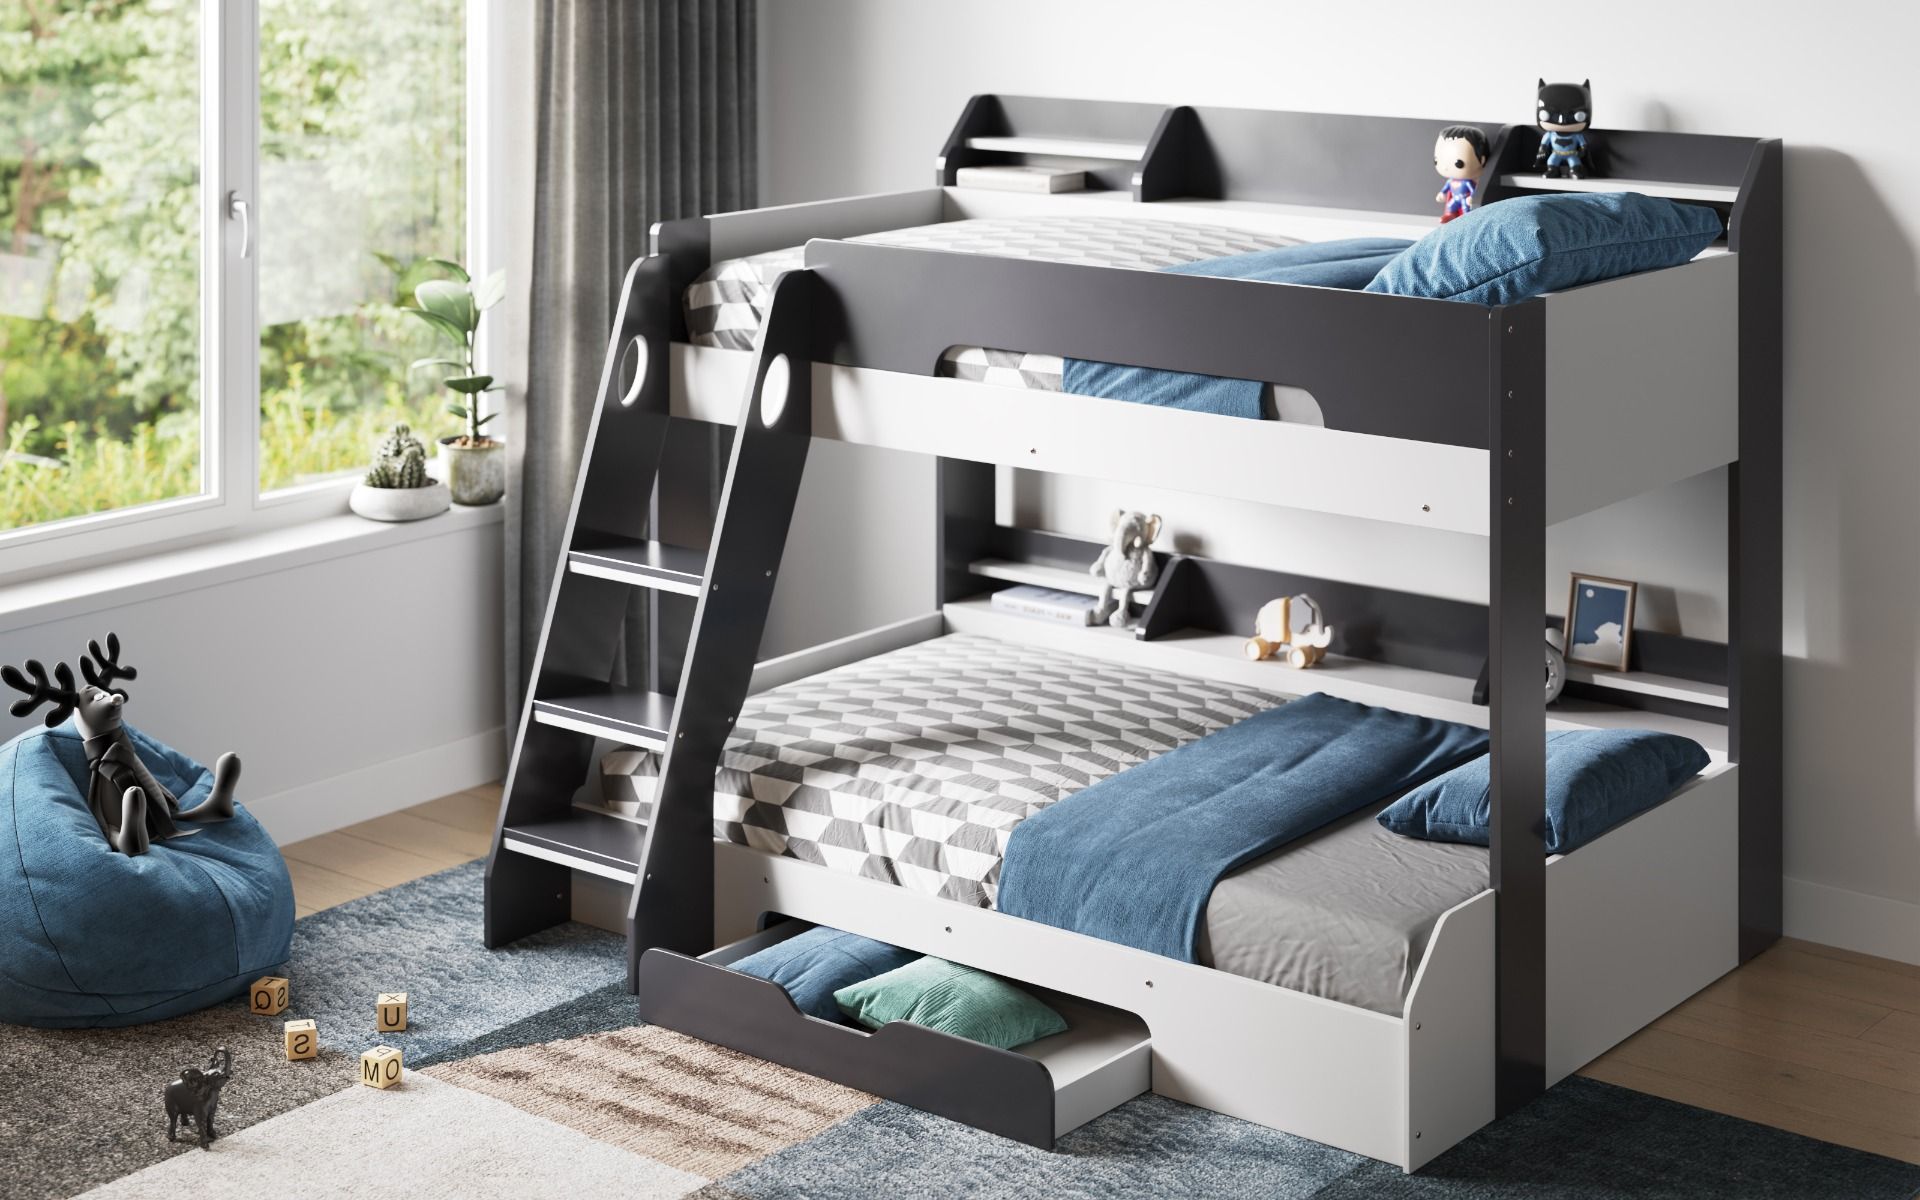 Flair Flick Triple Bunk Bed with Shelves And Drawer - Grey